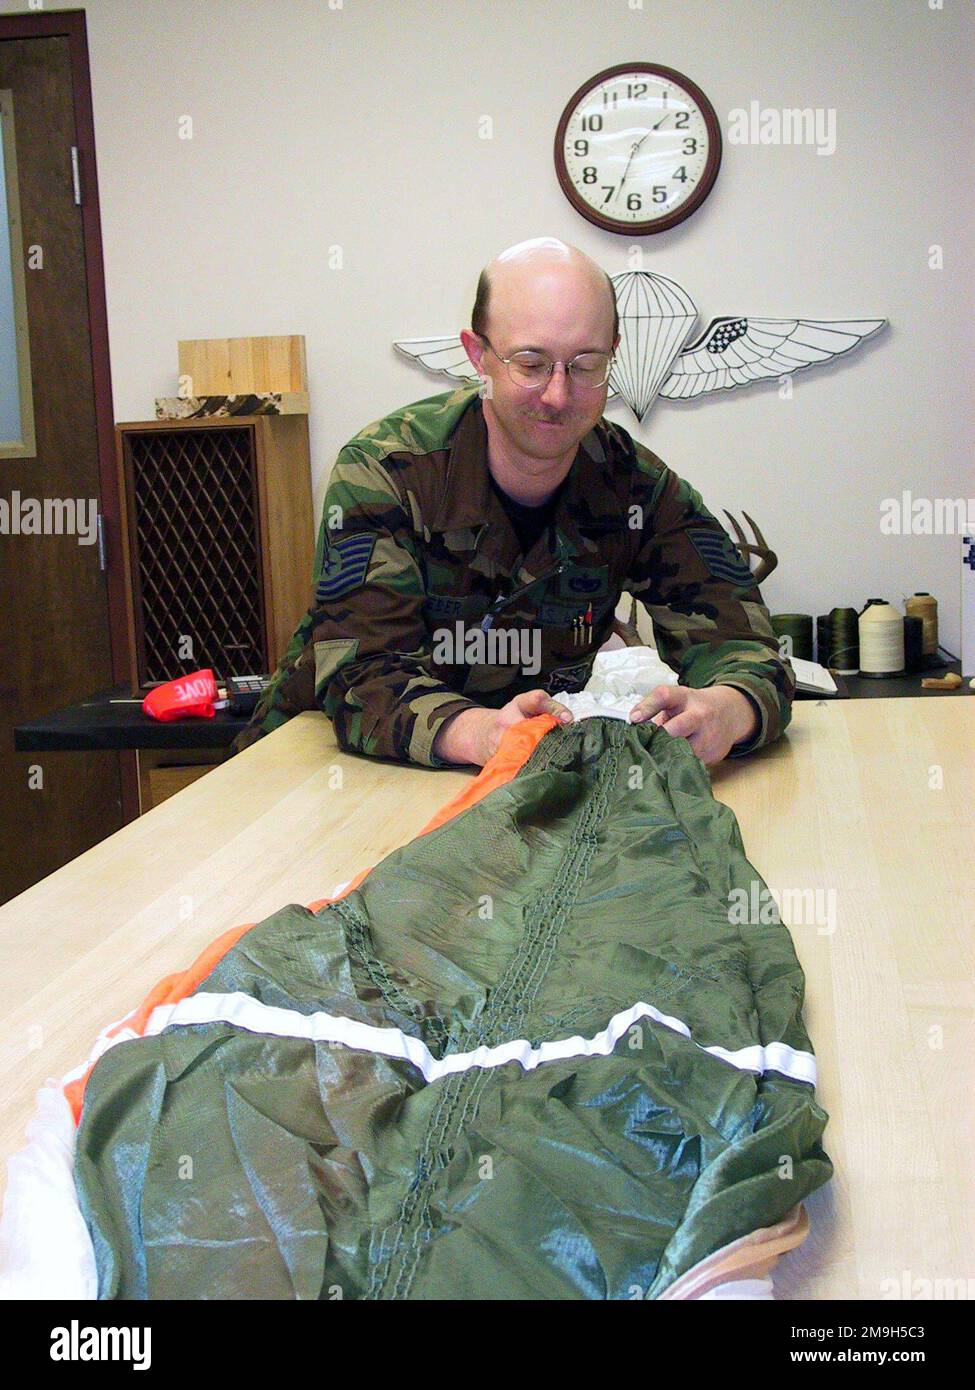 011211-F-4006S-002. Subject Operation/Series: NOBLE EAGLE 2001 Base: Duluth State: Minnesota (MN) Country: United States Of America (USA) Scene Major Command Shown: ANG Stock Photo